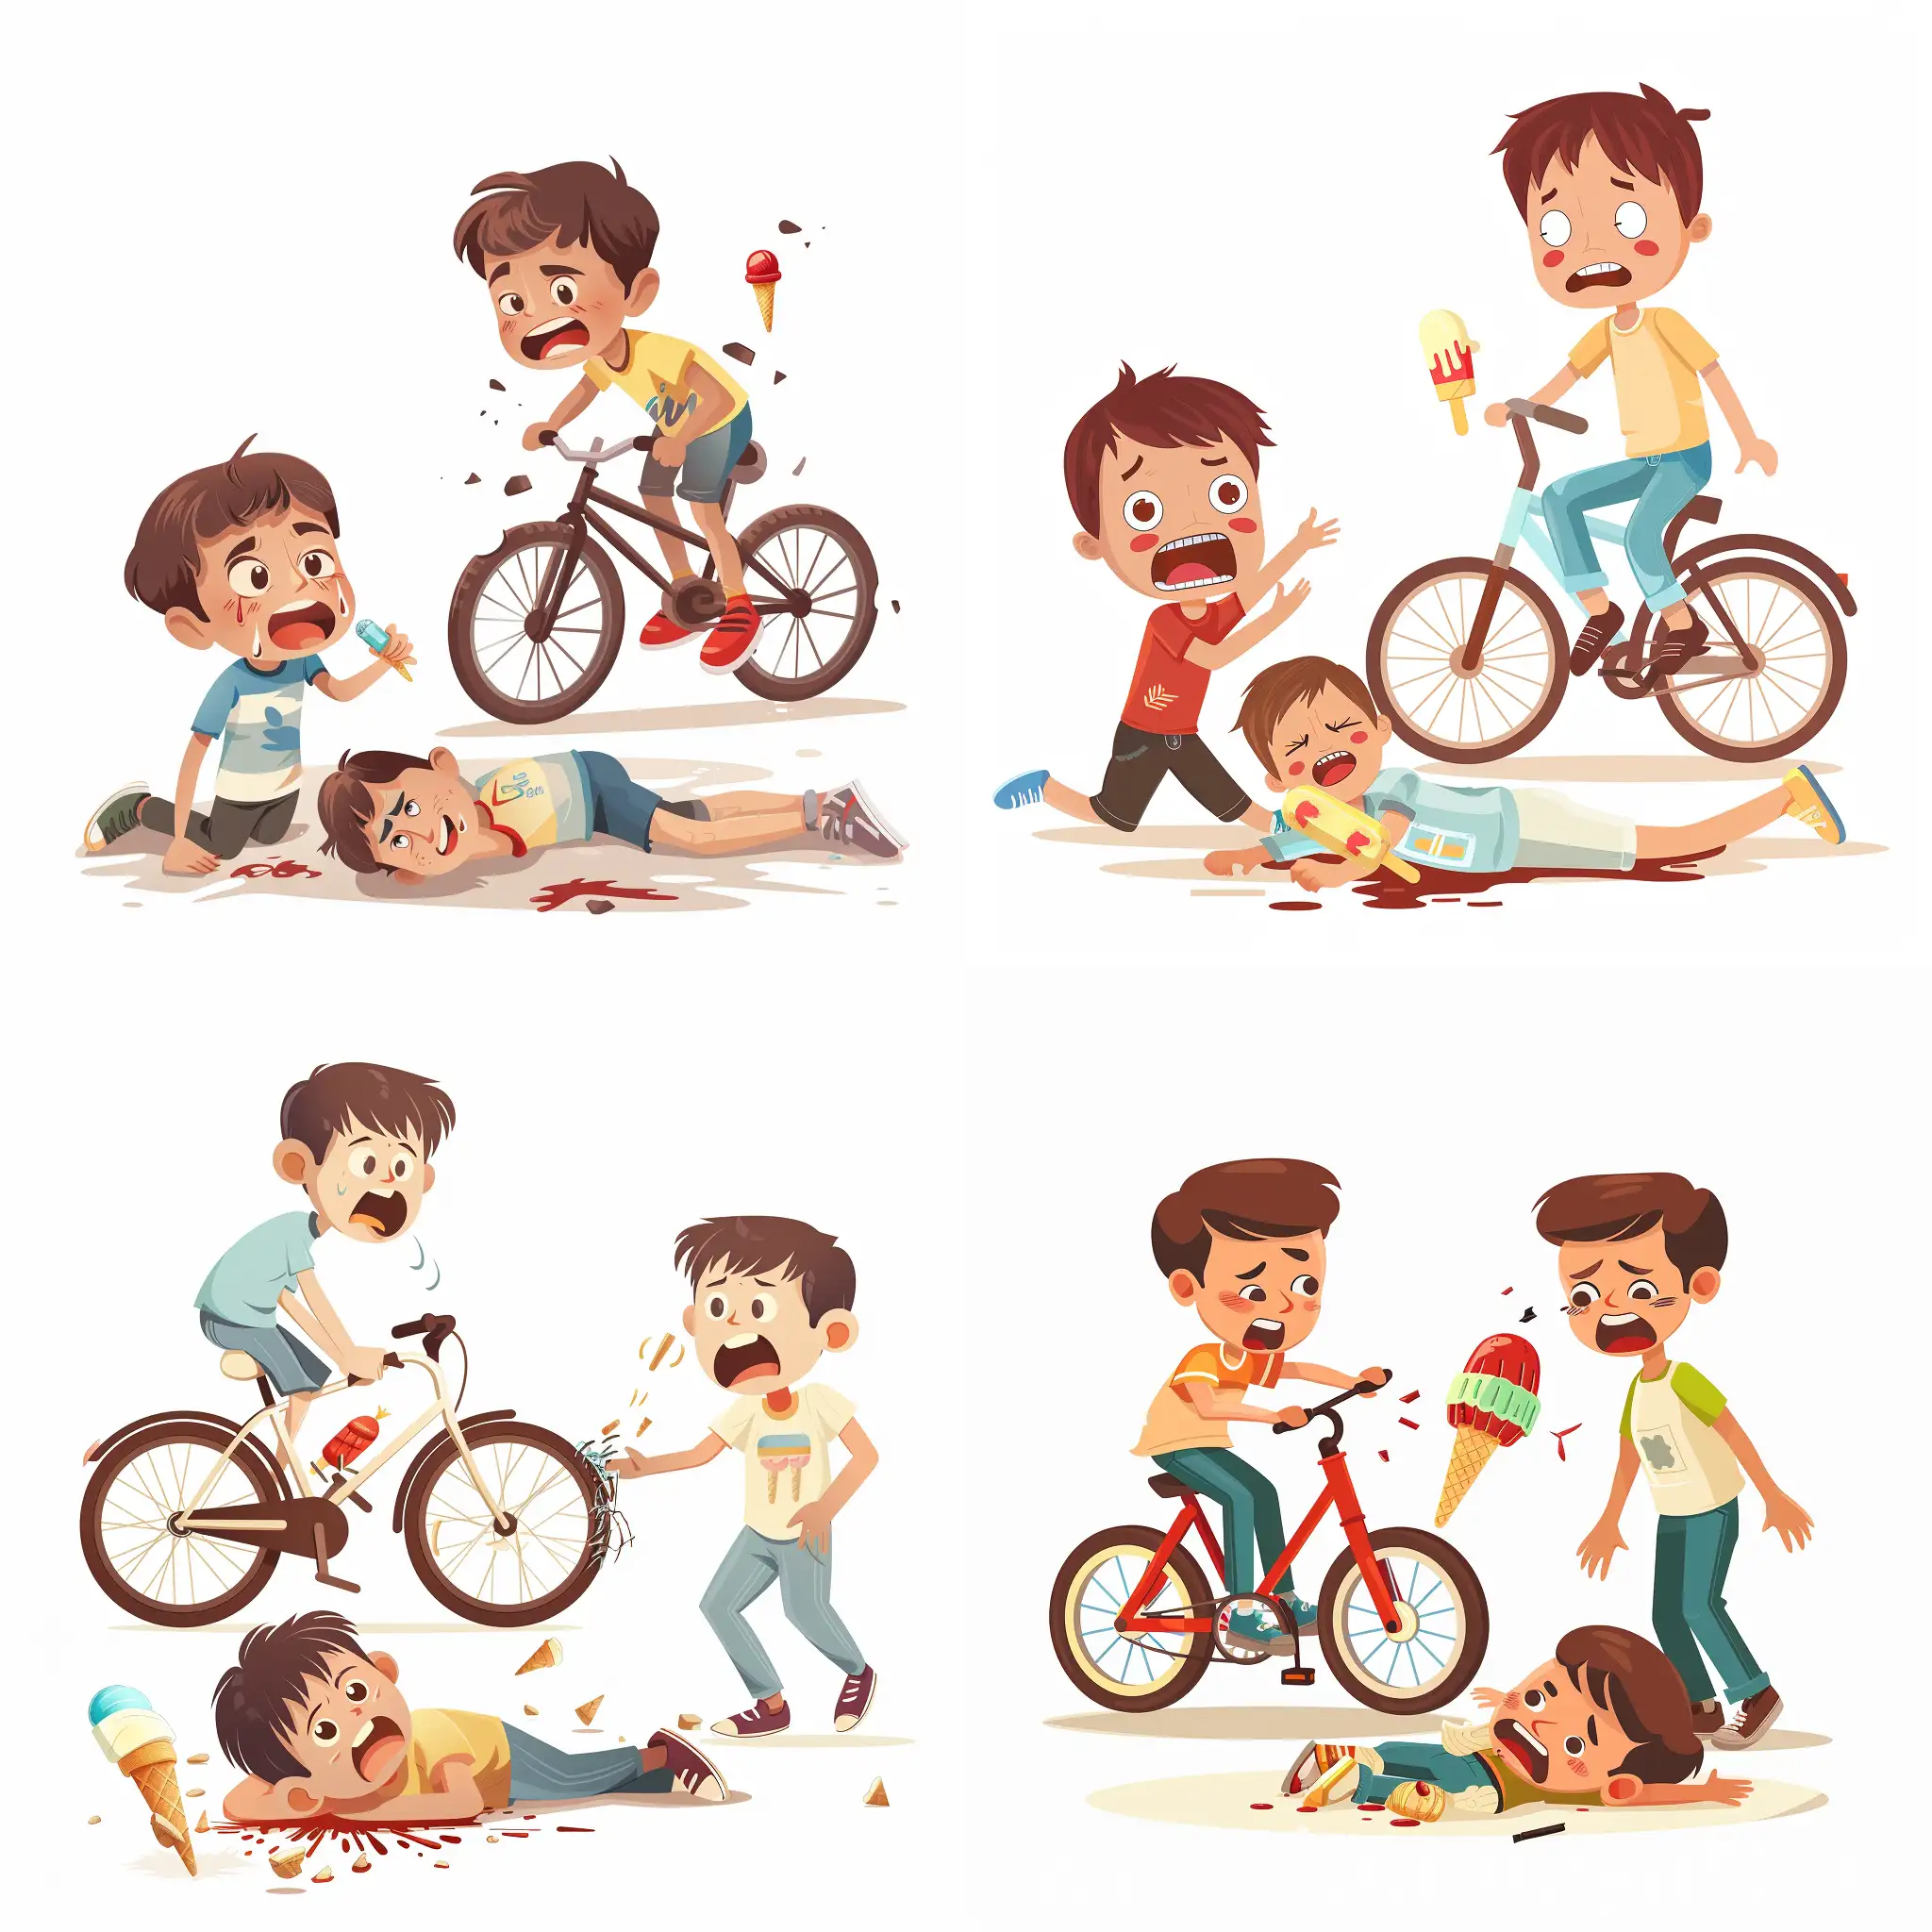 There are two boys, one is riding a bicycle and the other is lying on the ground. A bicycle collided with a pedestrian boy and an ice cream fell on the ground. The boy is crying. The two-wheeler driver looks worried and surprised